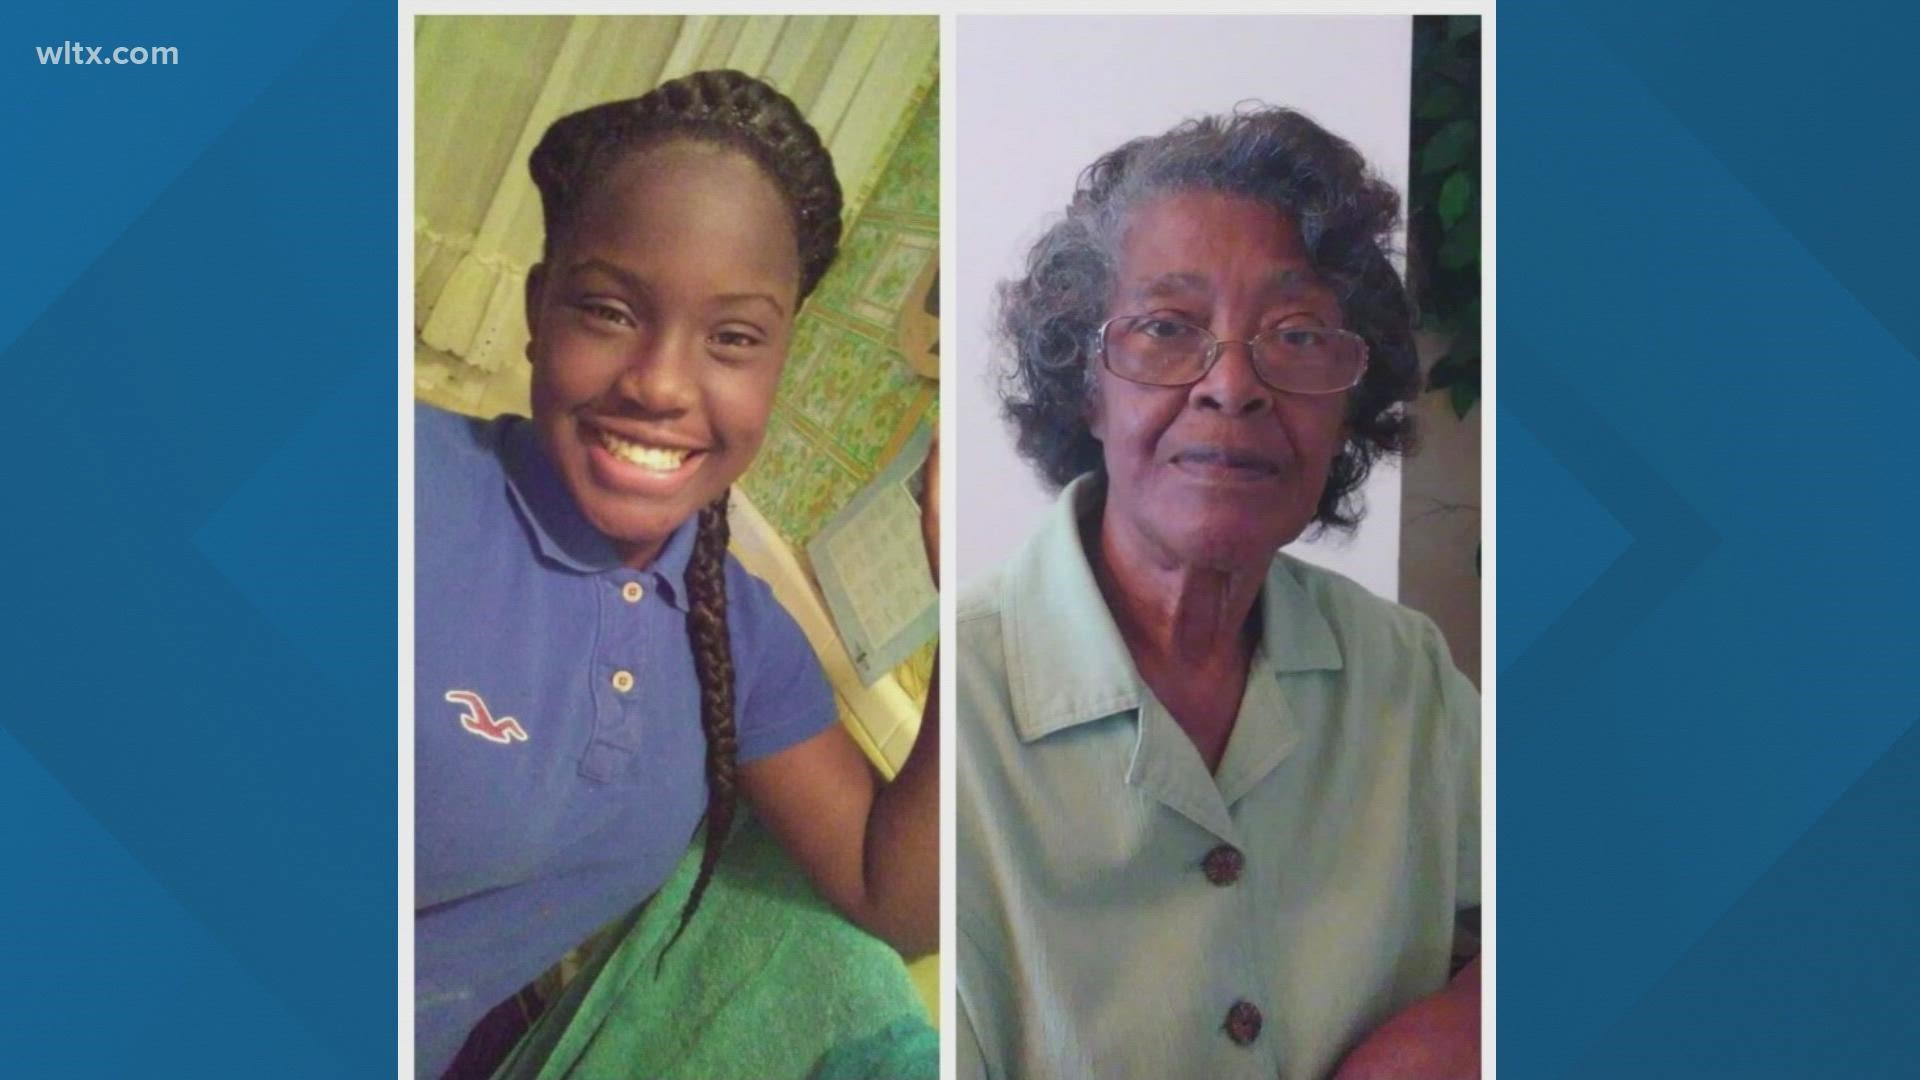 Investigators say Jessie Brown, 83, was killed by her son Rafael who they say also killed his teenage daughter Shaneal.